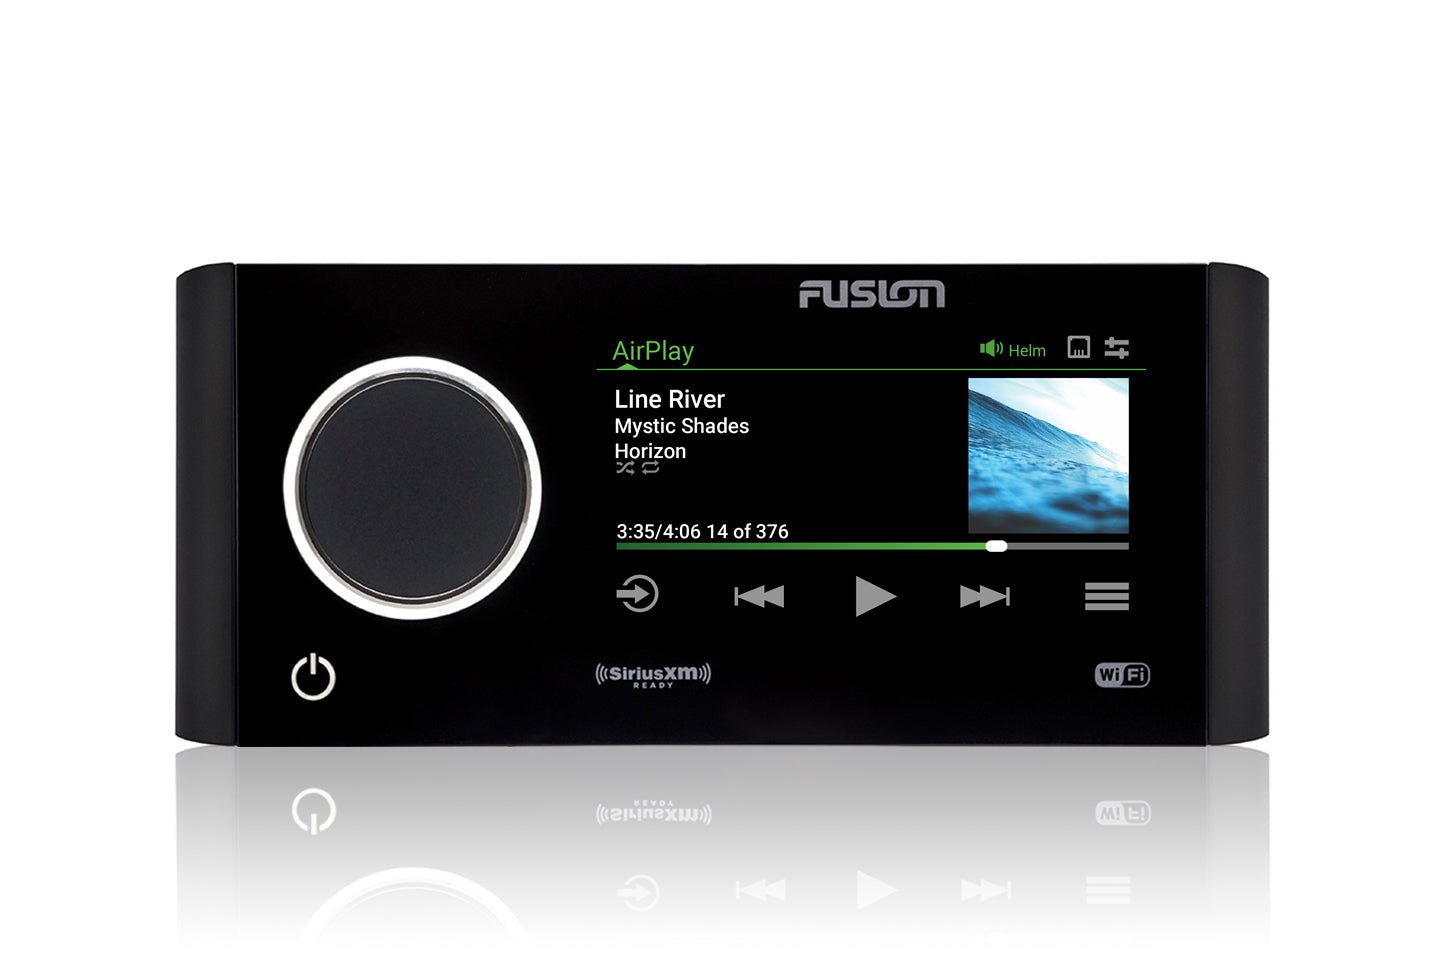 Fusion - MS-RA770 / 010-01905-00 - Apollo Marine Entertainment System With Built-In Wi-Fi